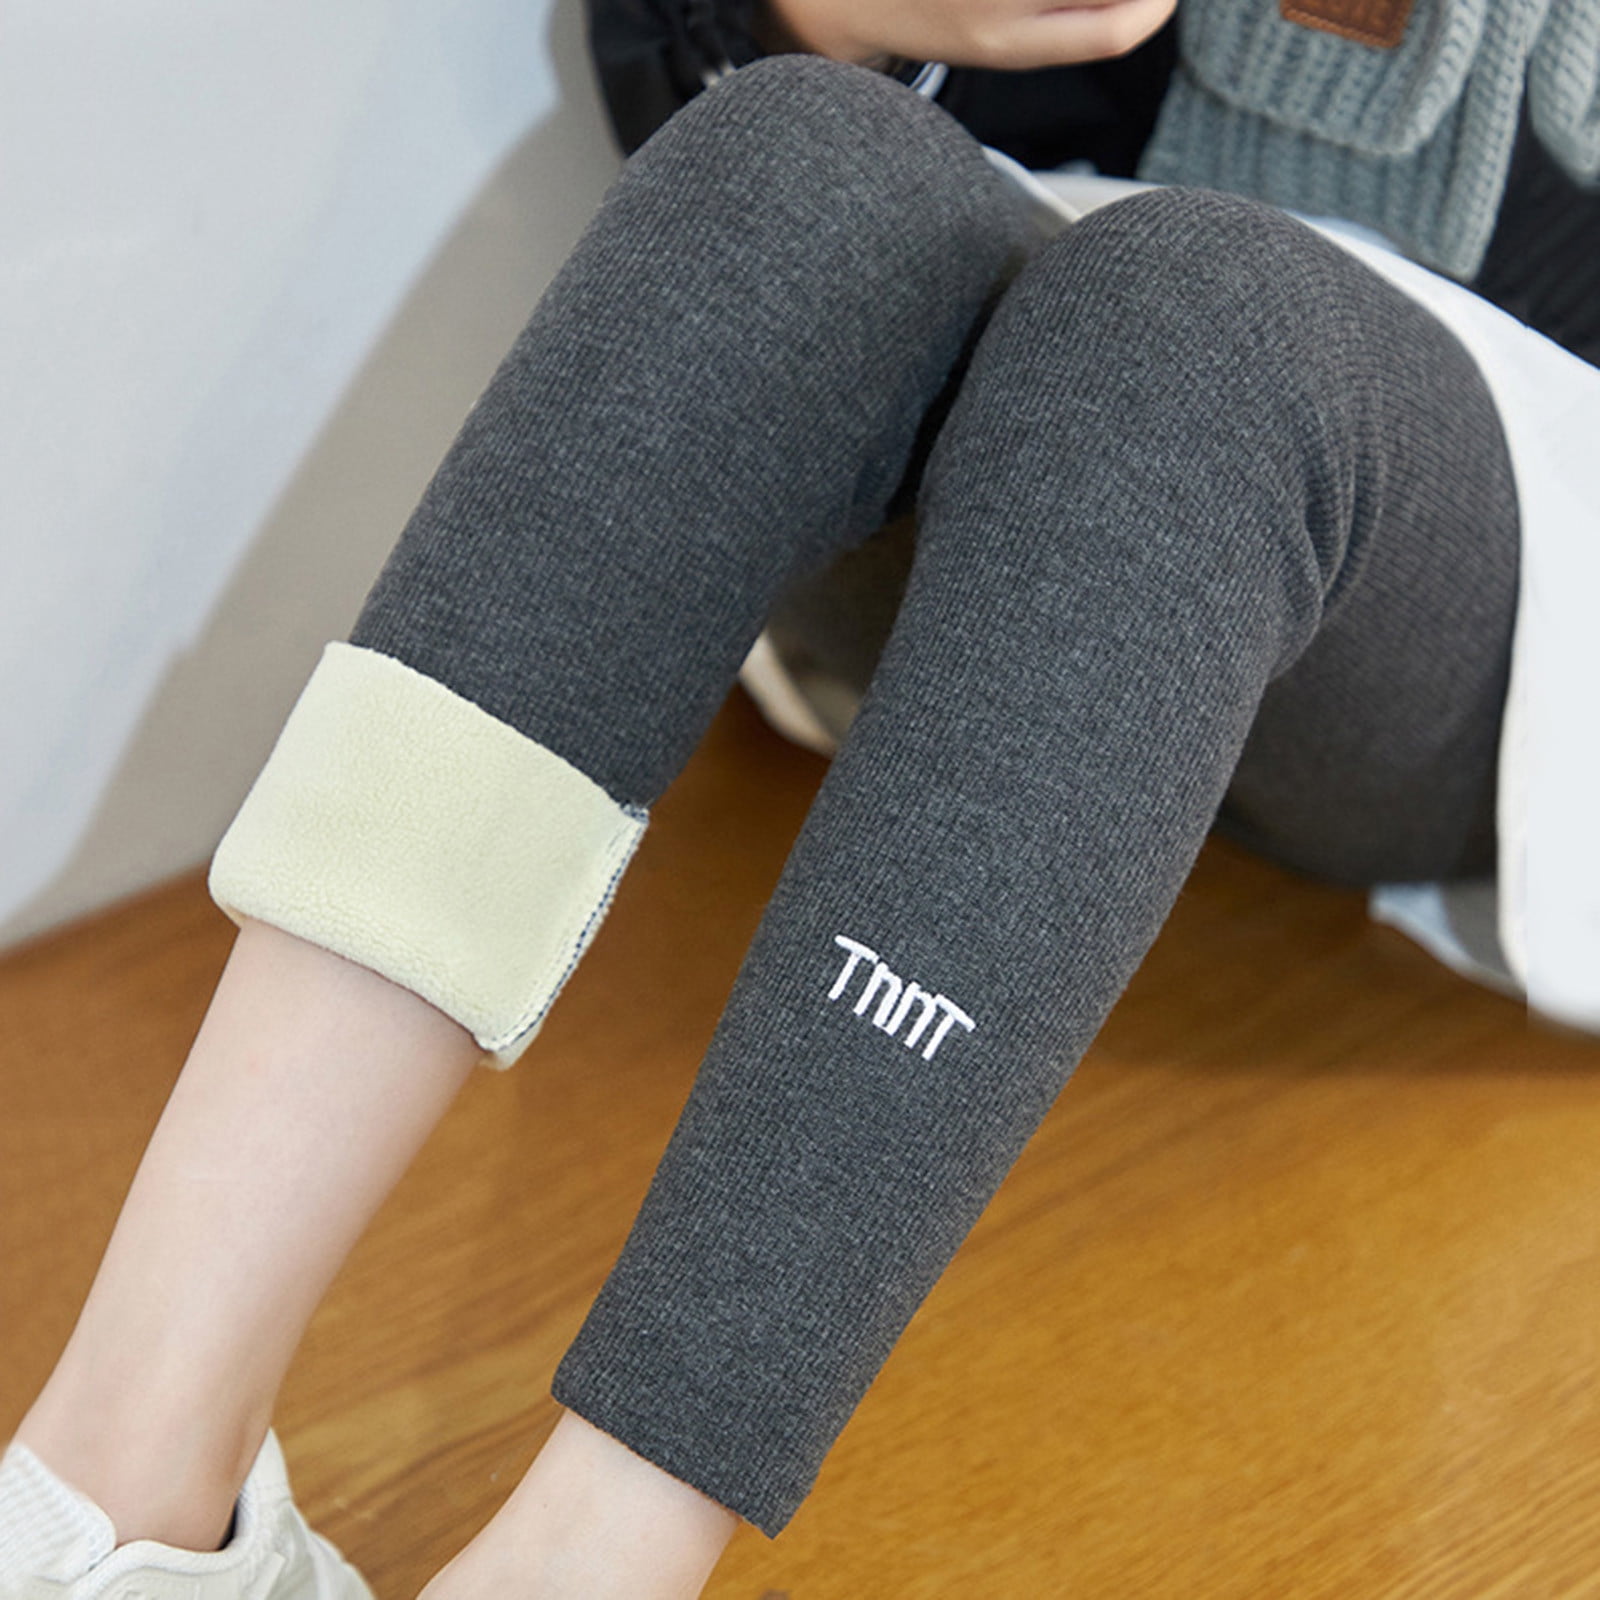 11 cozy and fleece-lined women's leggings for winter - Reviewed